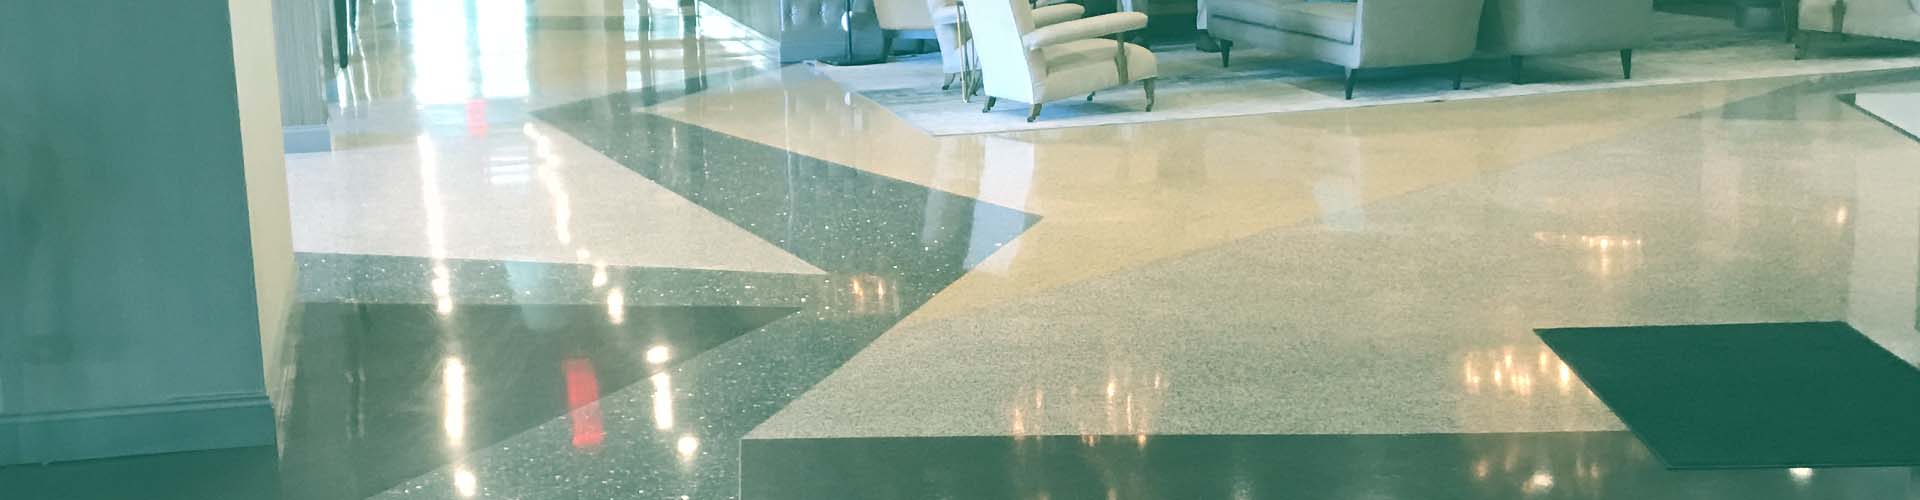 Commercial Flooring Company Reviews